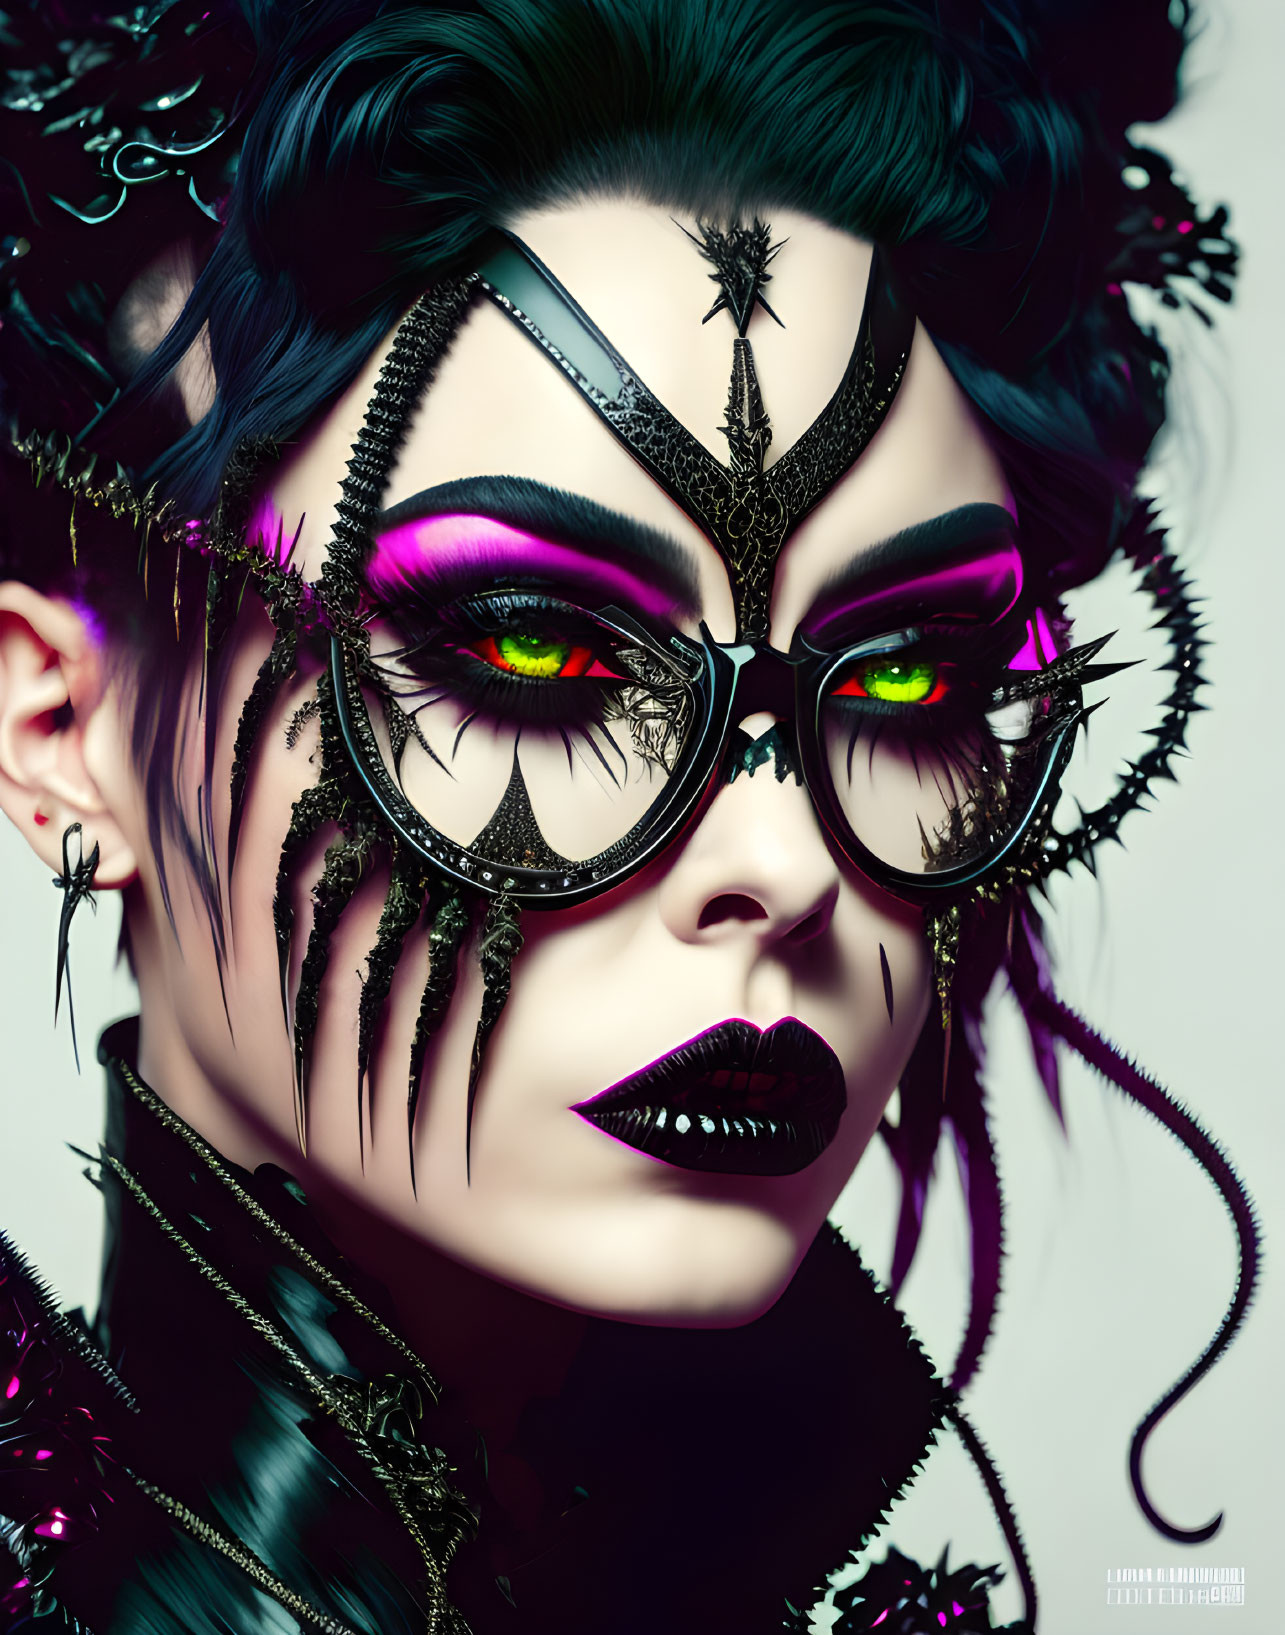 High-fashion portrait with dramatic makeup, elaborate accessories, vibrant eye color - gothic & avant-garde